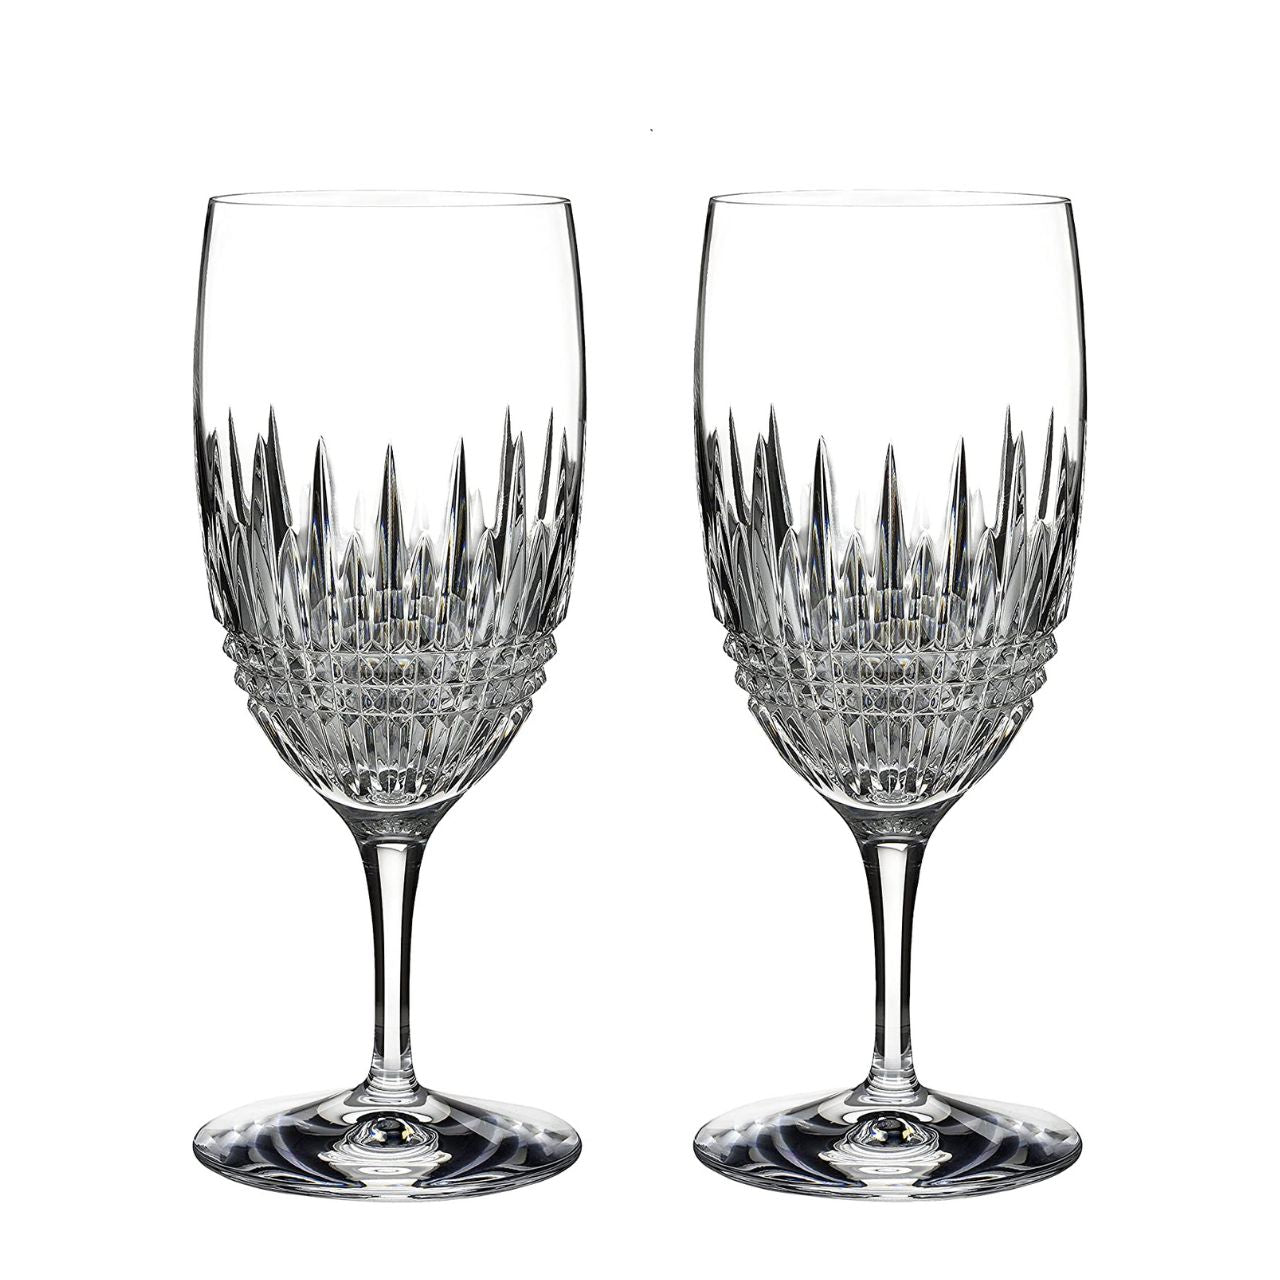 Waterford Crystal Lismore Diamond Essence Iced Beverage Set  Lismore Diamond Essence pairs the contemporary contours of the Essence Collection shapes with the faceted diamond and alternating vertical cuts of the Lismore Diamond pattern for the perfect amount of luxury style.